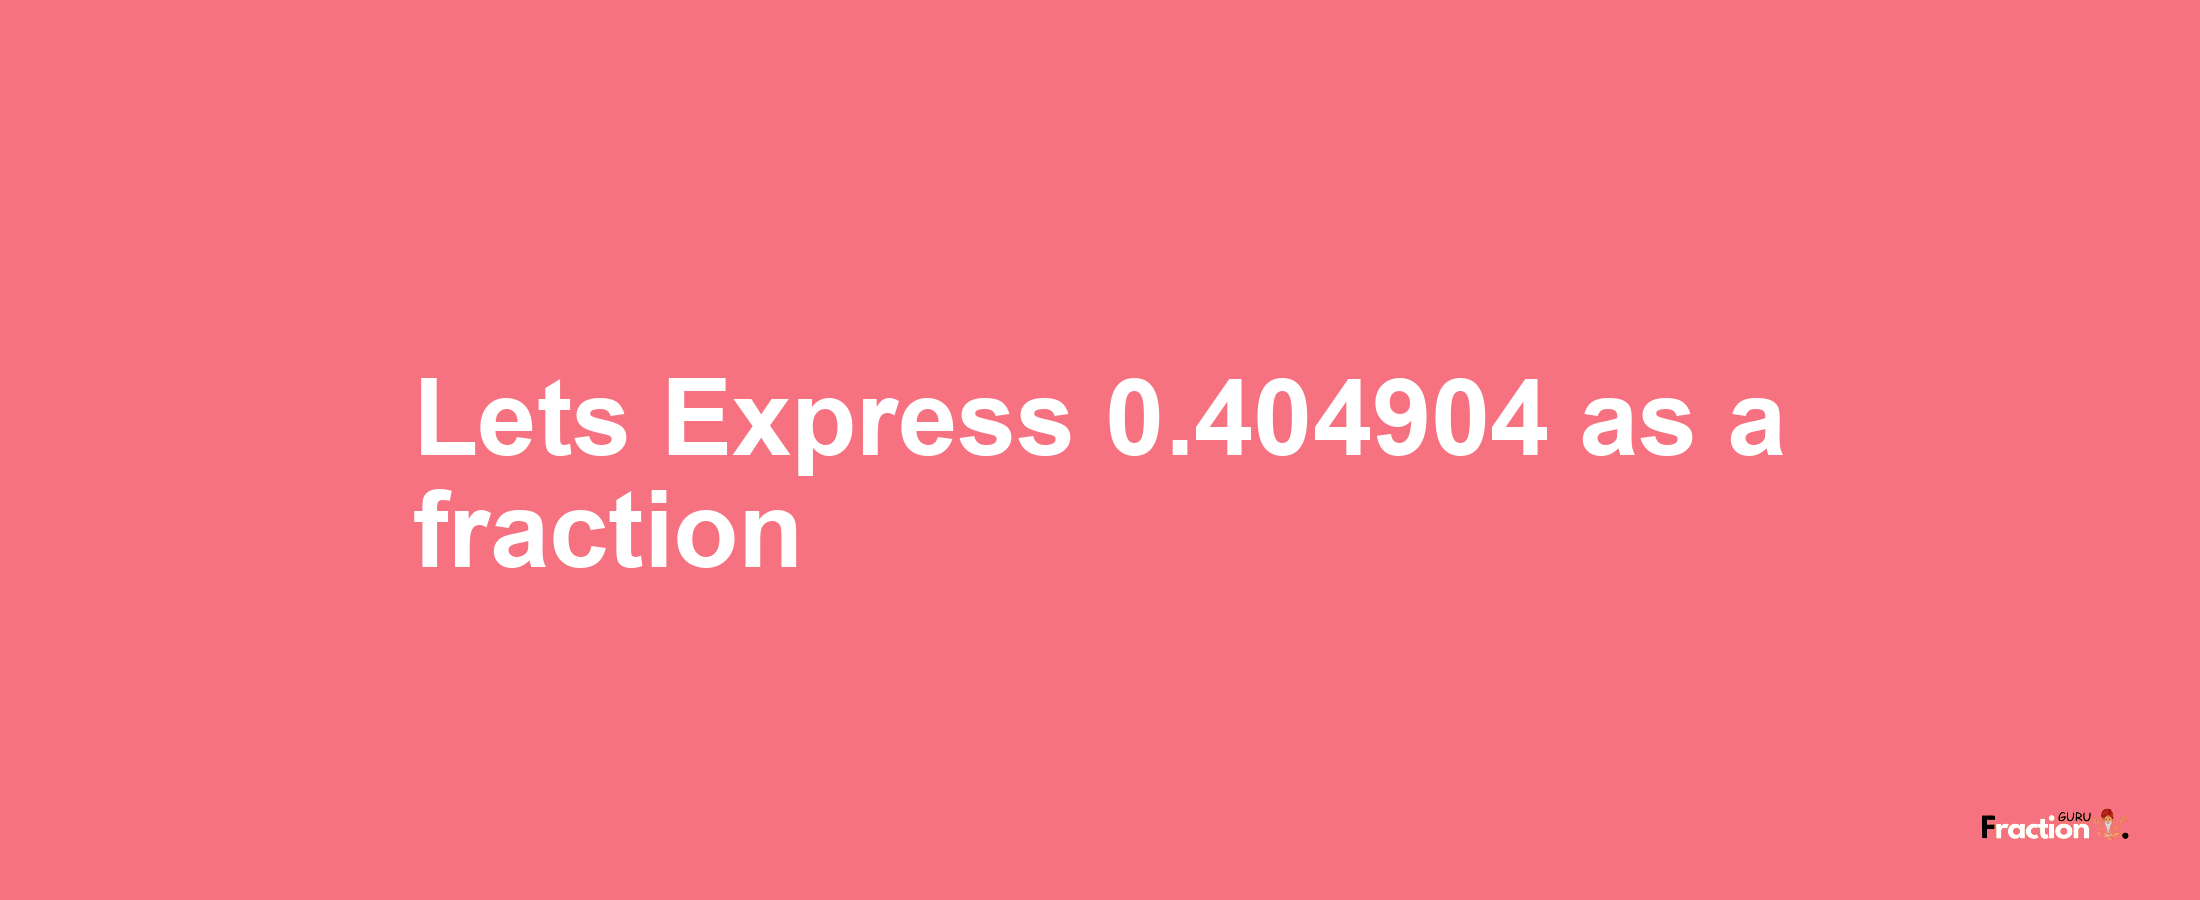 Lets Express 0.404904 as afraction